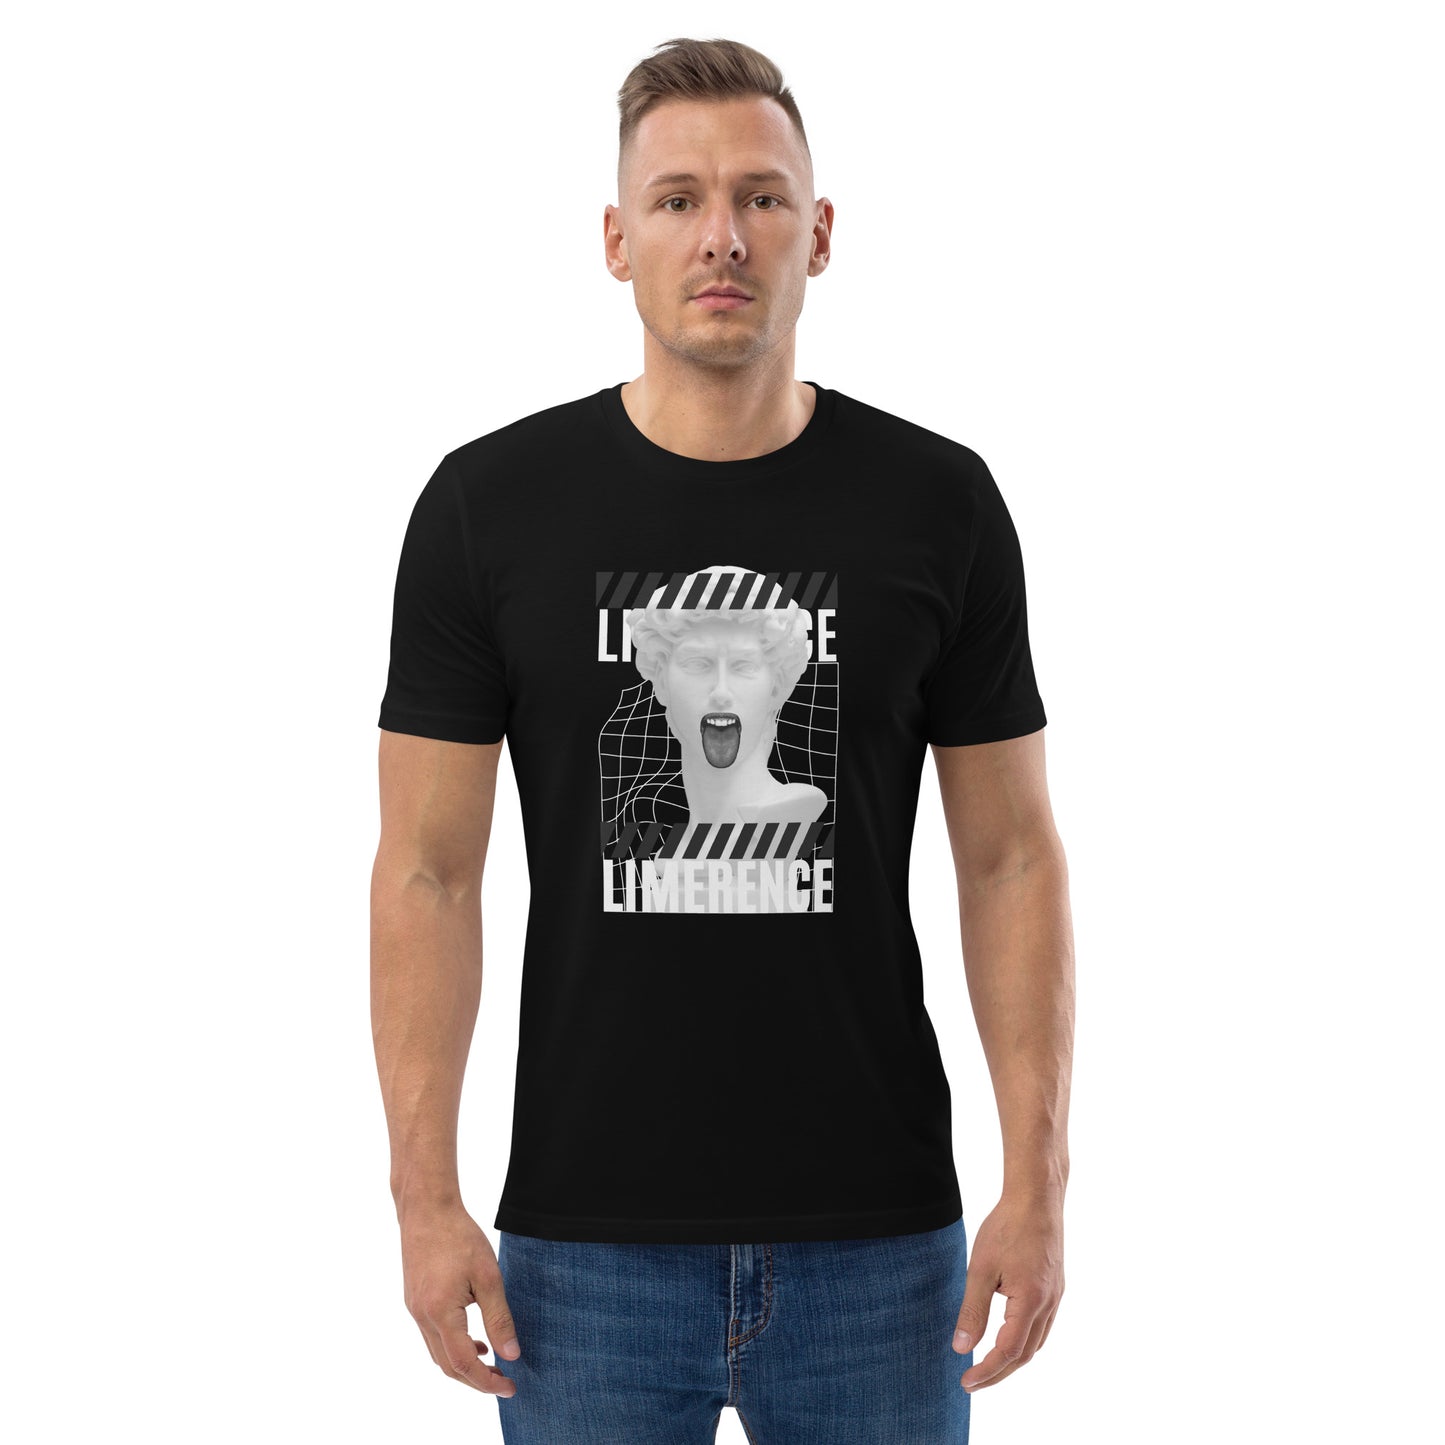 T-shirt Limerence